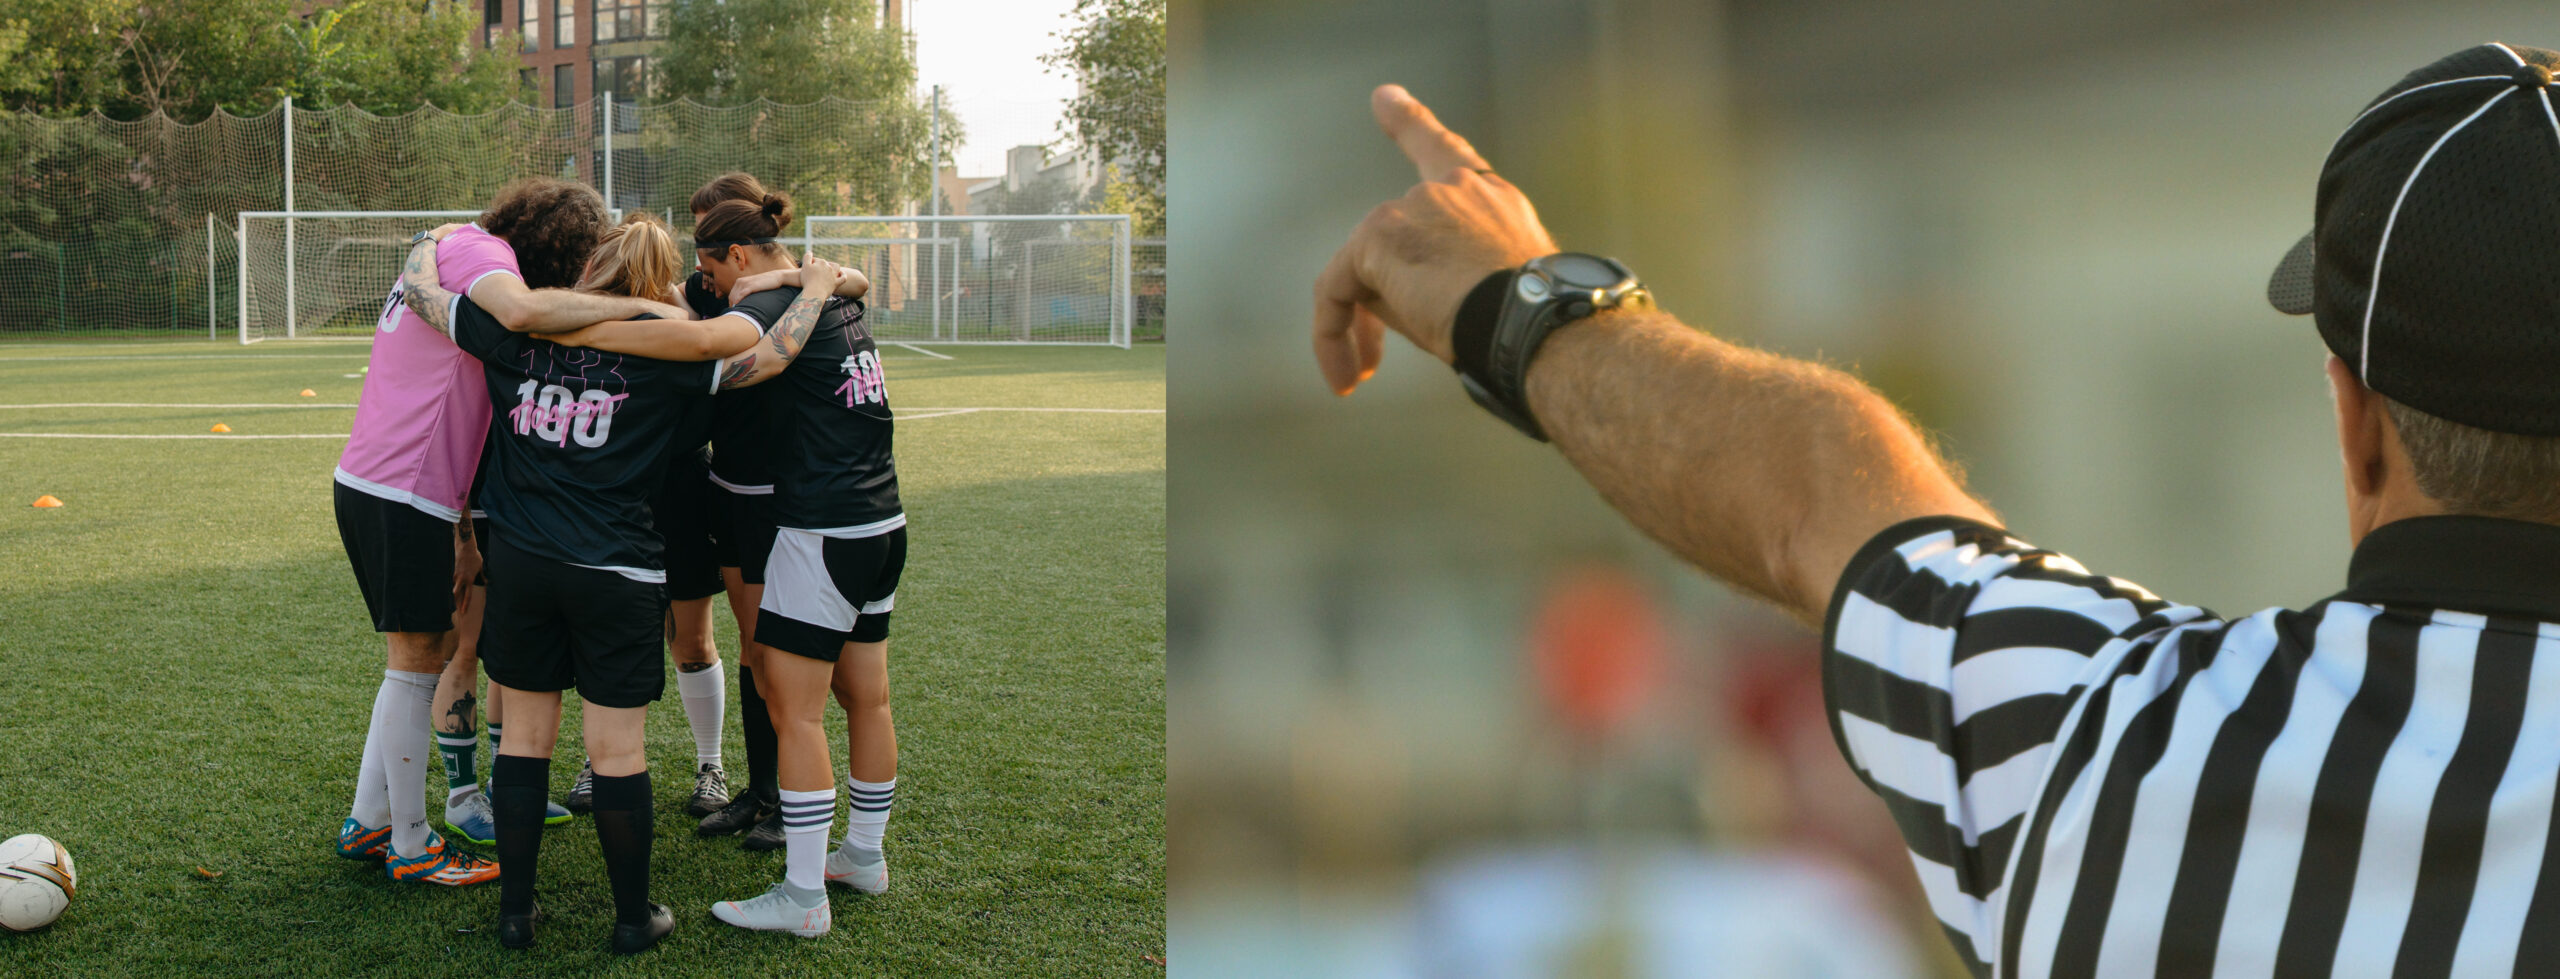 Left picture: soccer players in a huddle on the pitch; right picture: an umpire in a black-striped shirt points with his raised left hand.